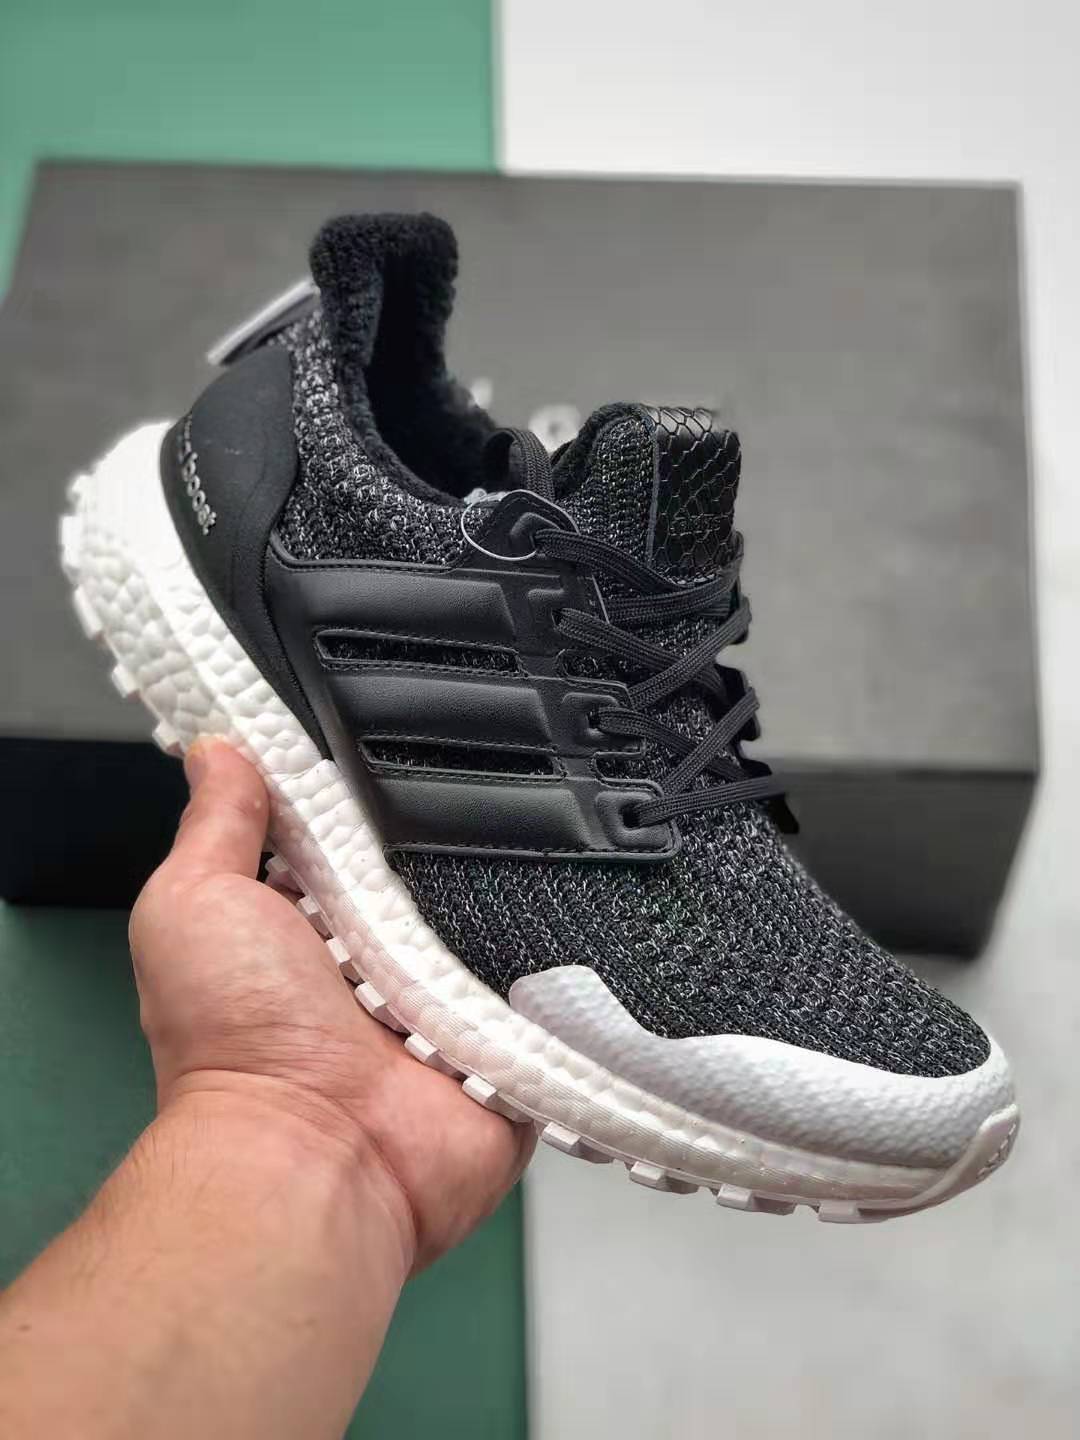 Adidas Game Of Thrones x UltraBoost 4.0 Night's Watch - Buy Now!